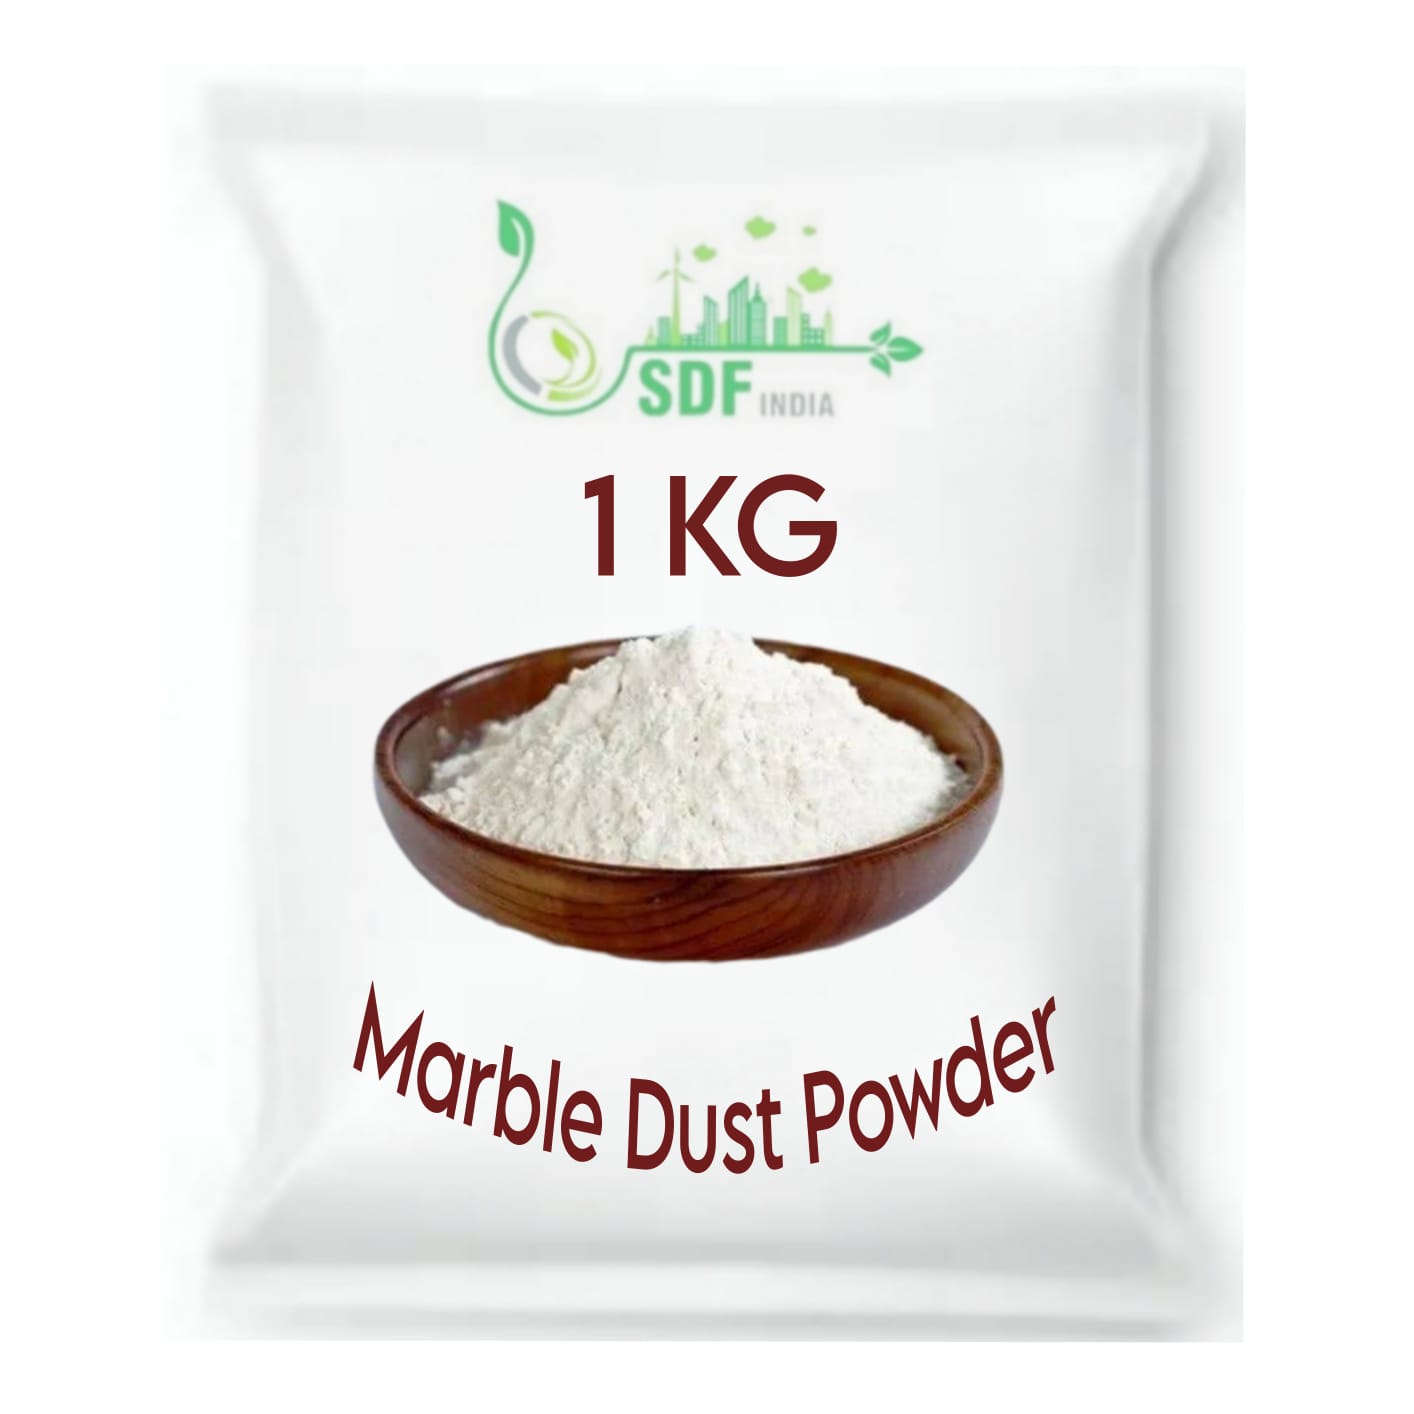 SDF INDIA  Marble dust, White Marble Powder for Mural Art, Relief Painting, Raised Art, Persian Art, DIY, Gift for Artists, Students, Children & for All Arts (1KG)